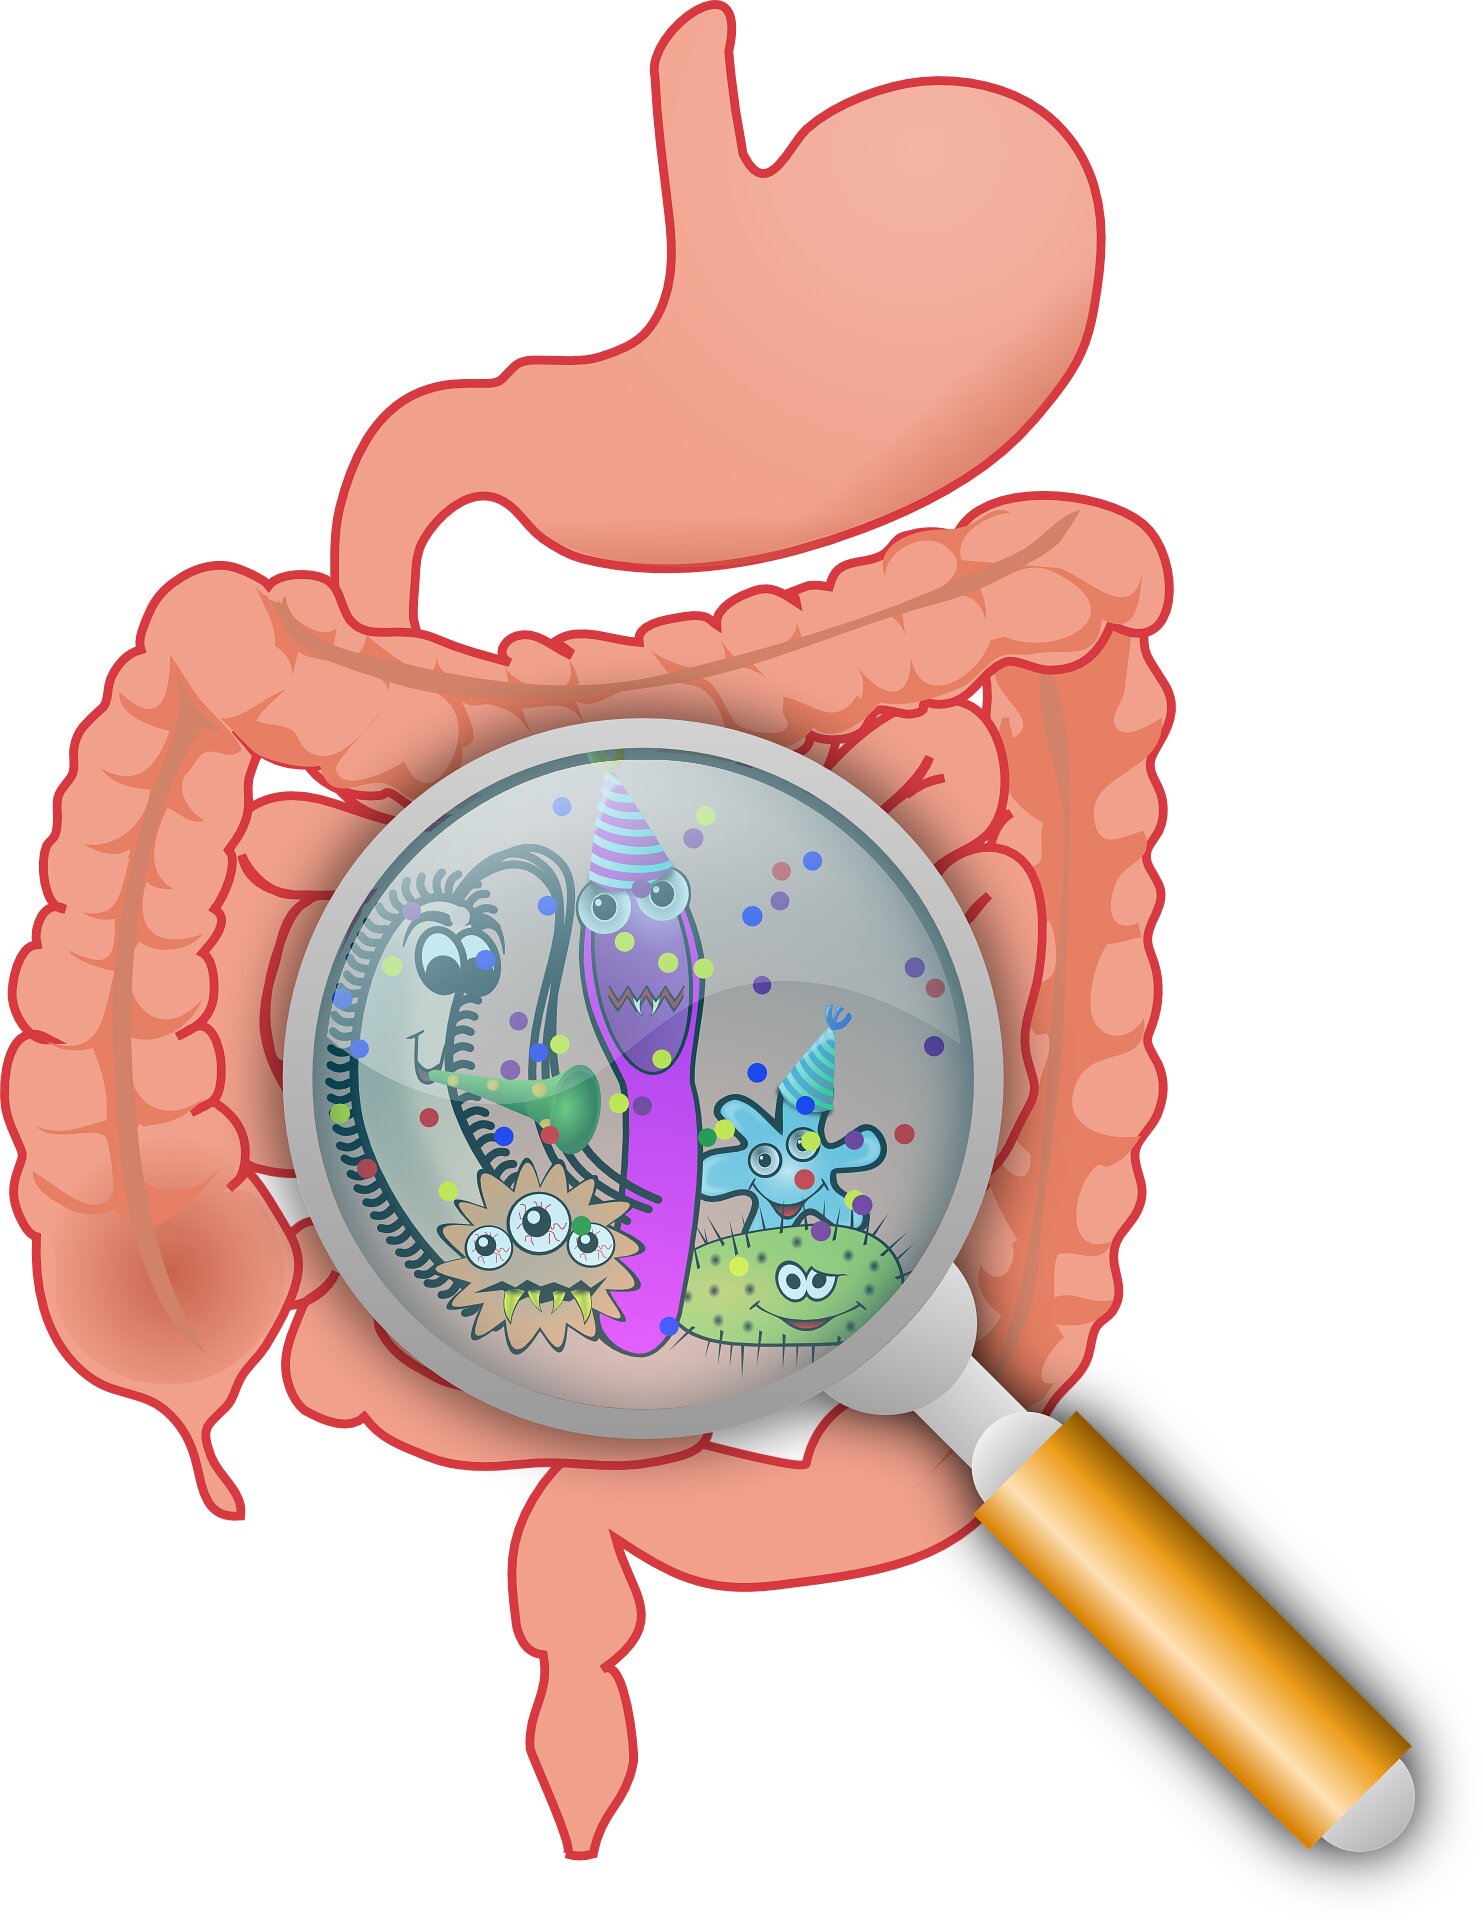 Common food preservative has unexpected effects on the gut microbiome